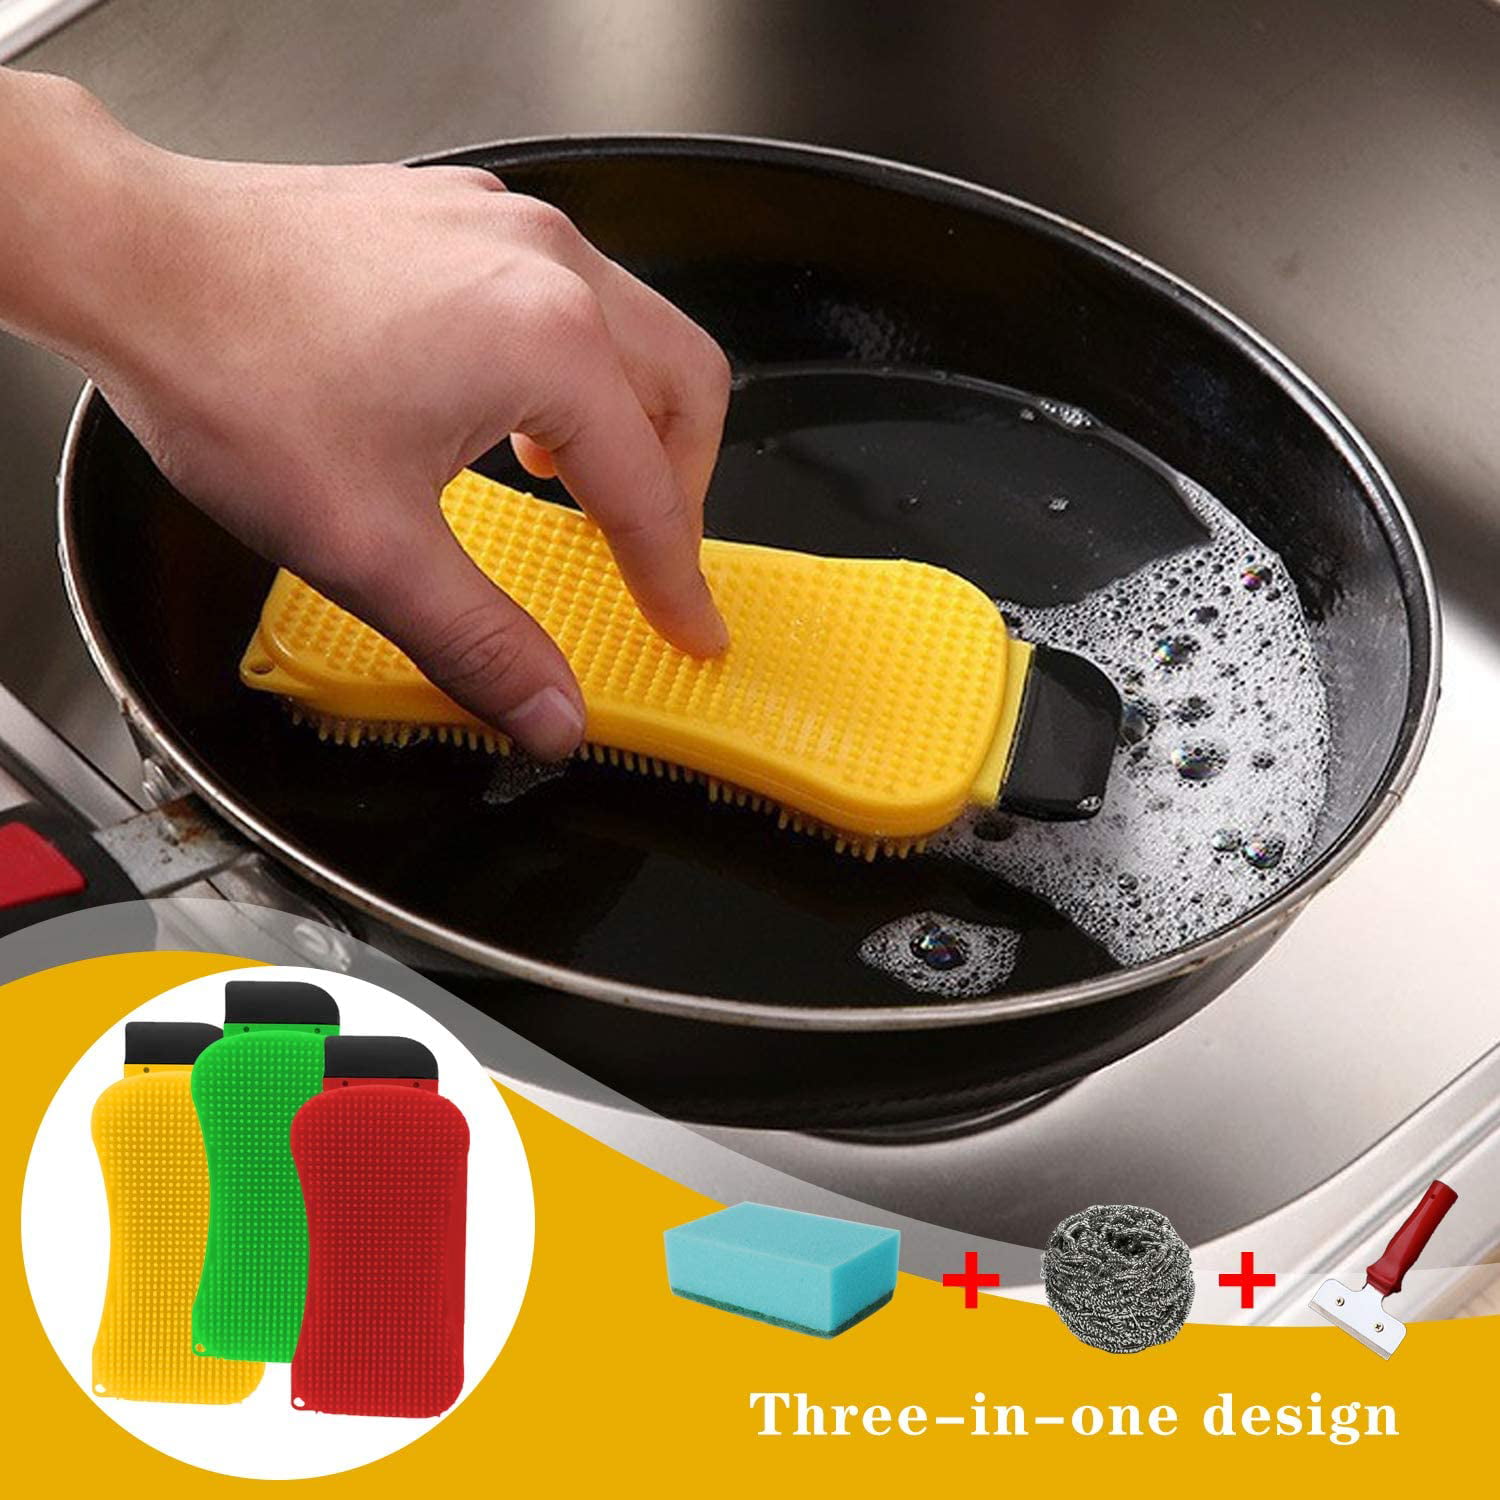 Silicone Sponge Dish Washing Kitchen Scrubber - Magic Food-Grade Dishes  Multipurpose Better Sponges Non Stick Cleaning Smart Kitchen Gadgets Brush  Accessories-3pcs 